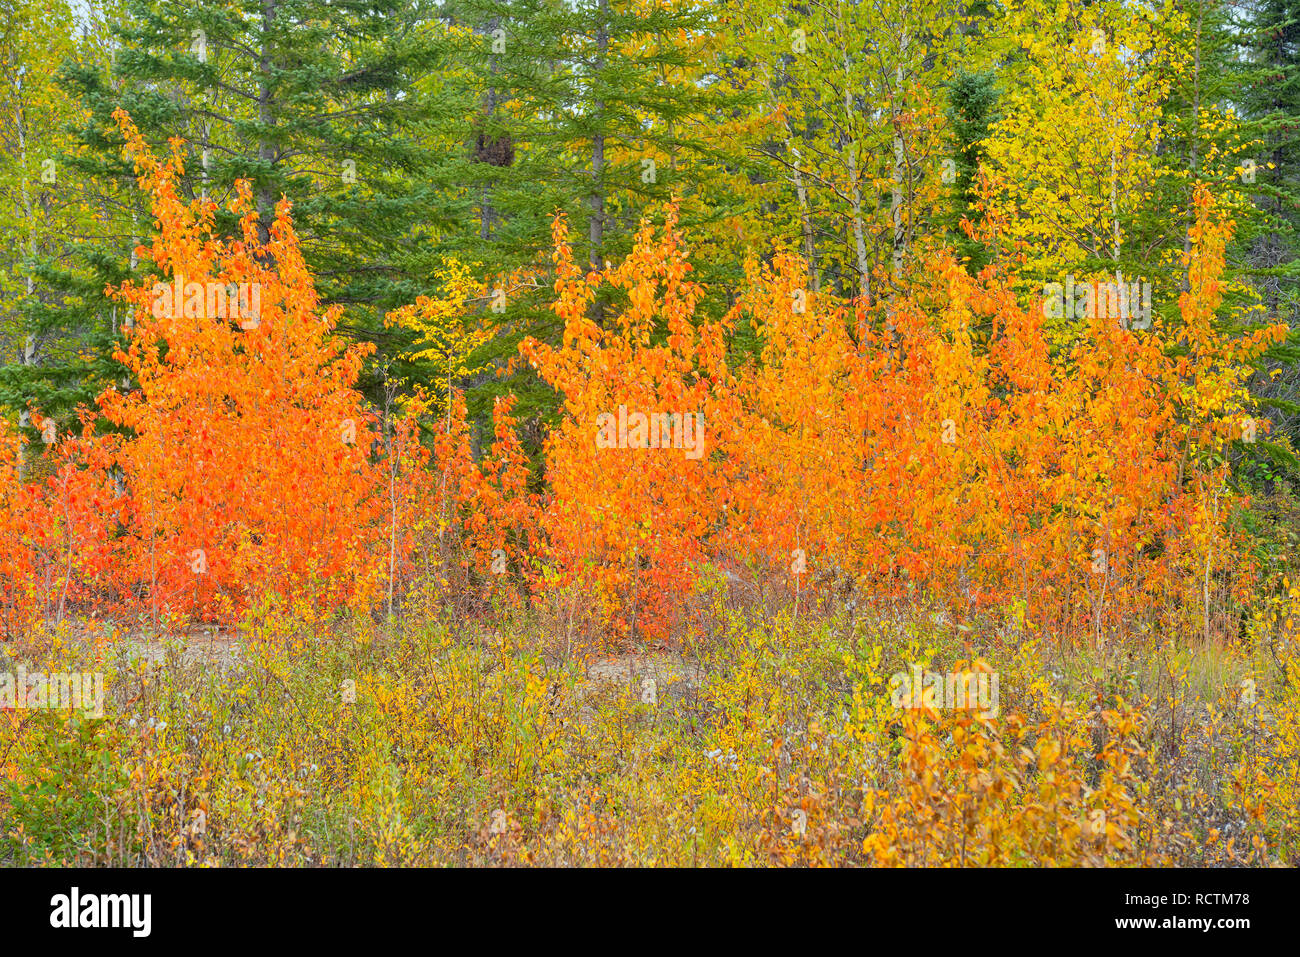 Dwarf birch, larch and spruce, Hwy 3 North to Yellowknife, Northwest Territories, Canada Stock Photo